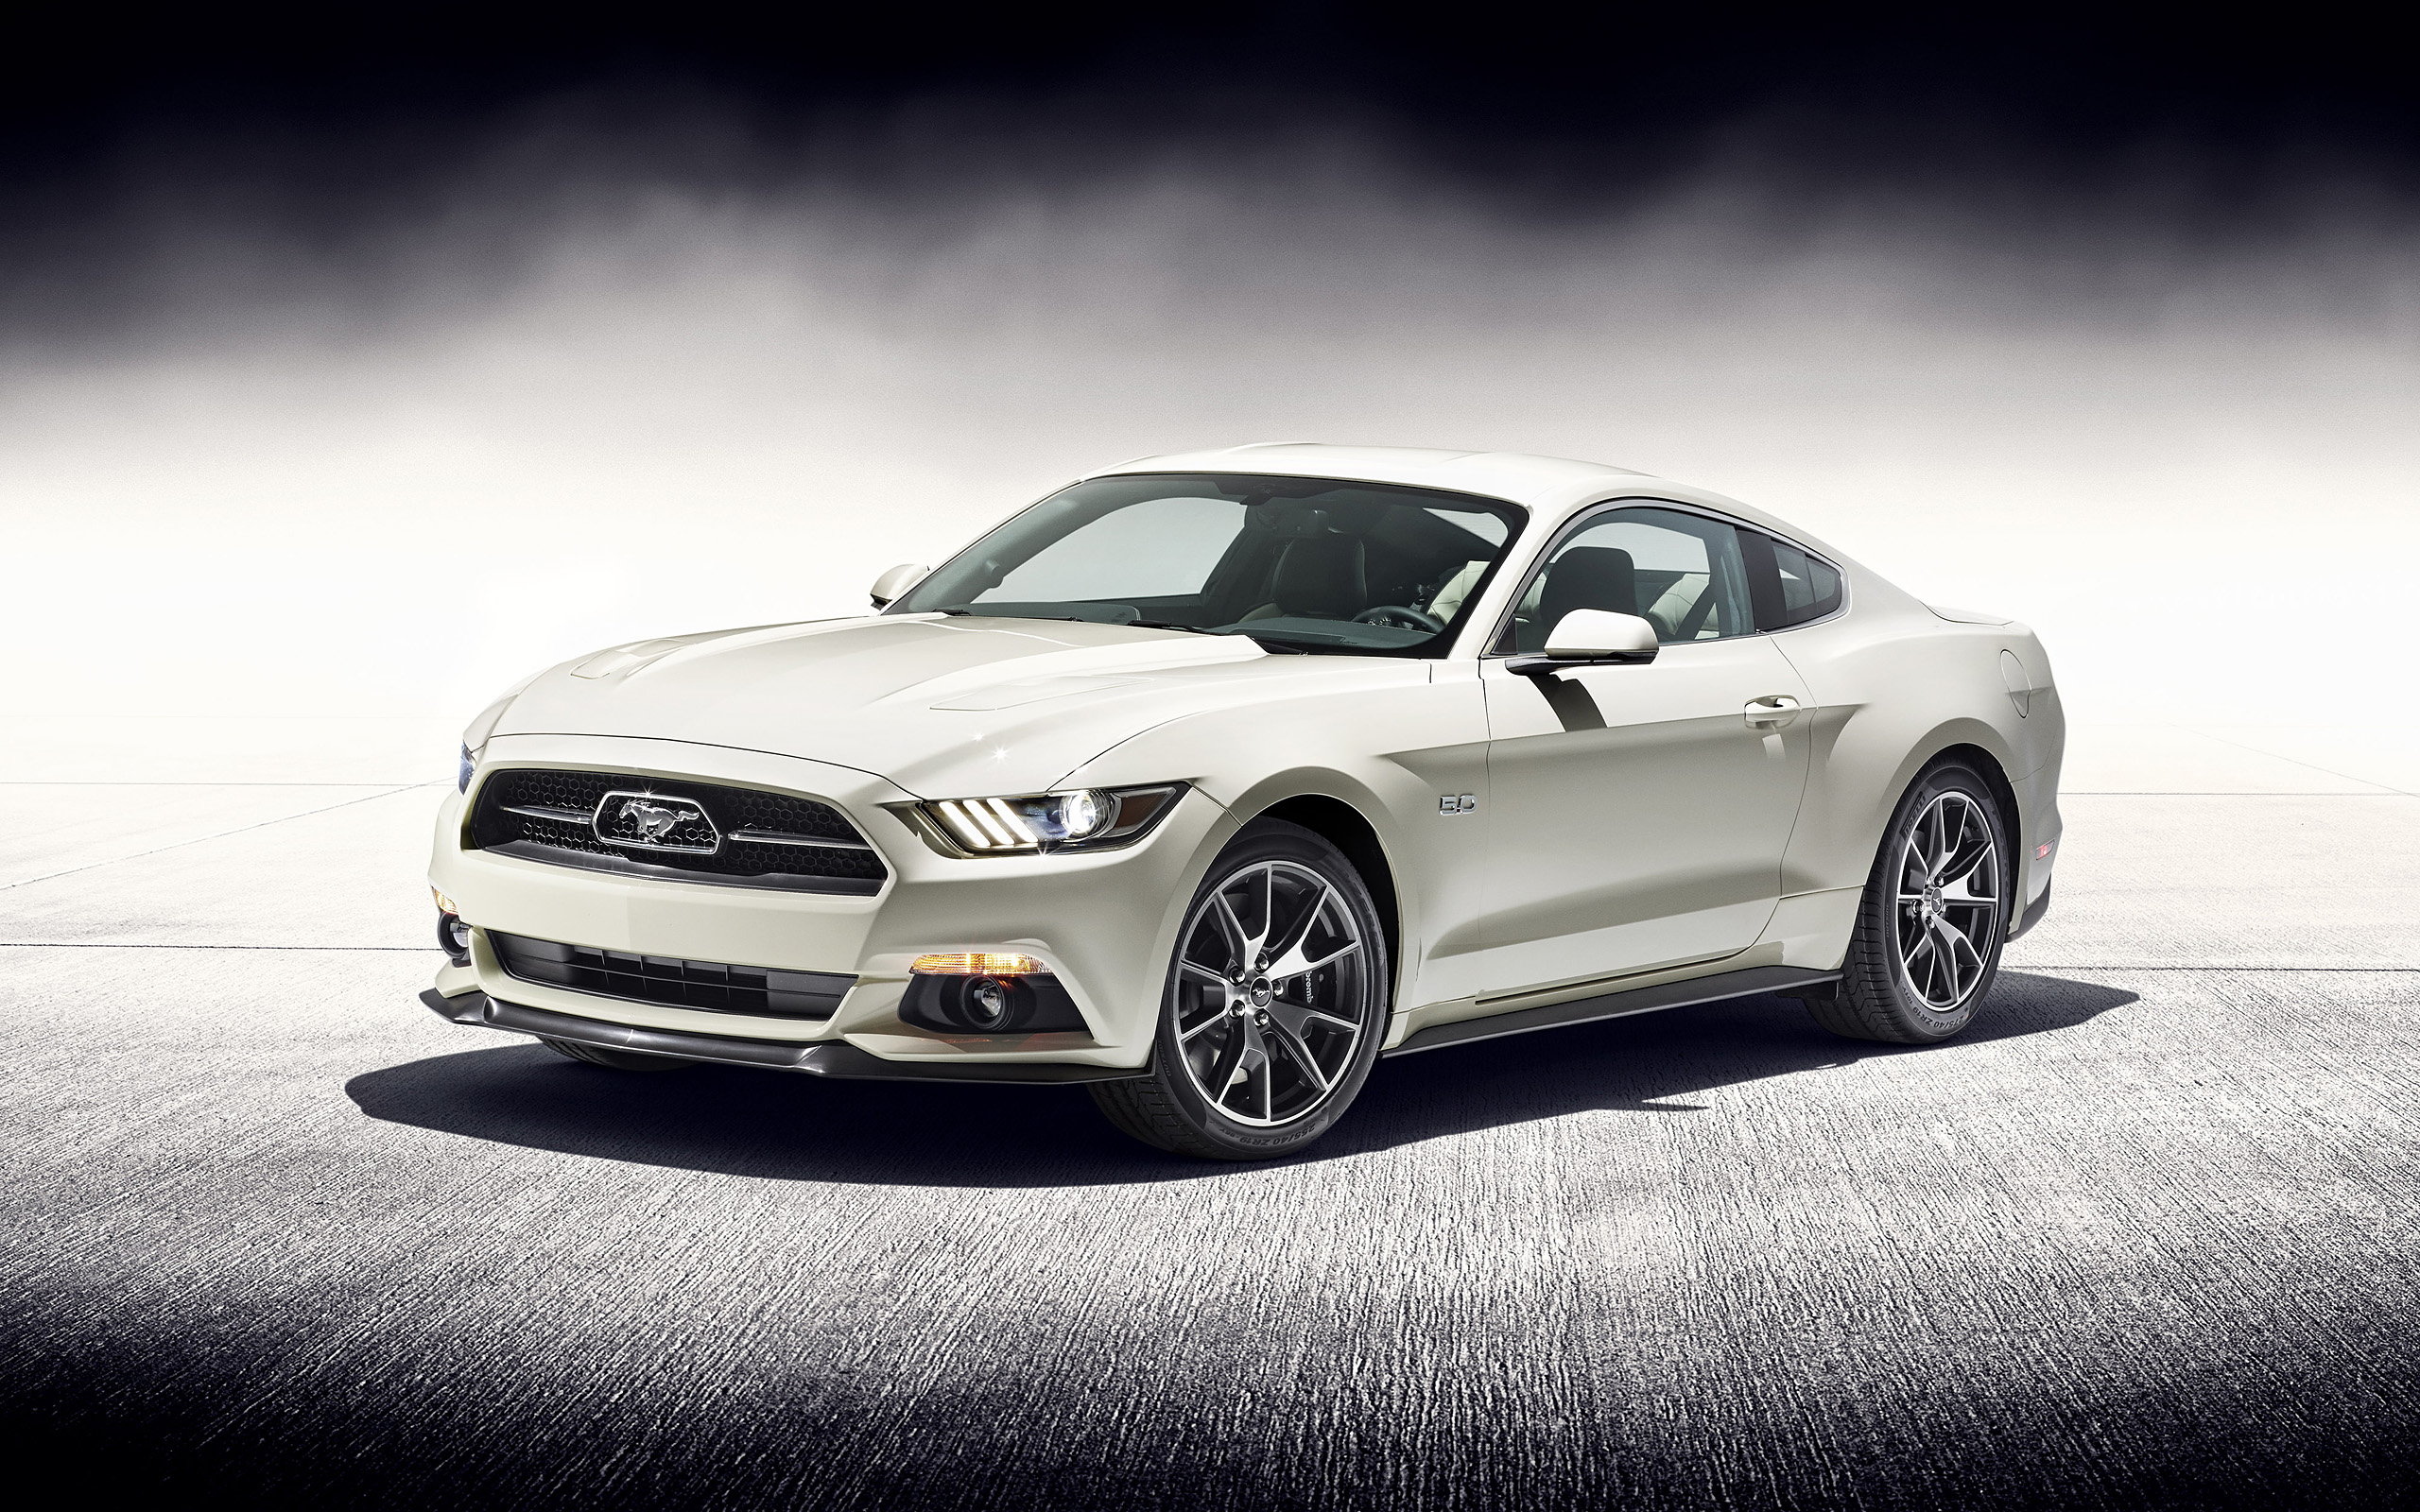  2015 Ford Mustang 50 Year Limited Edition Wallpaper.